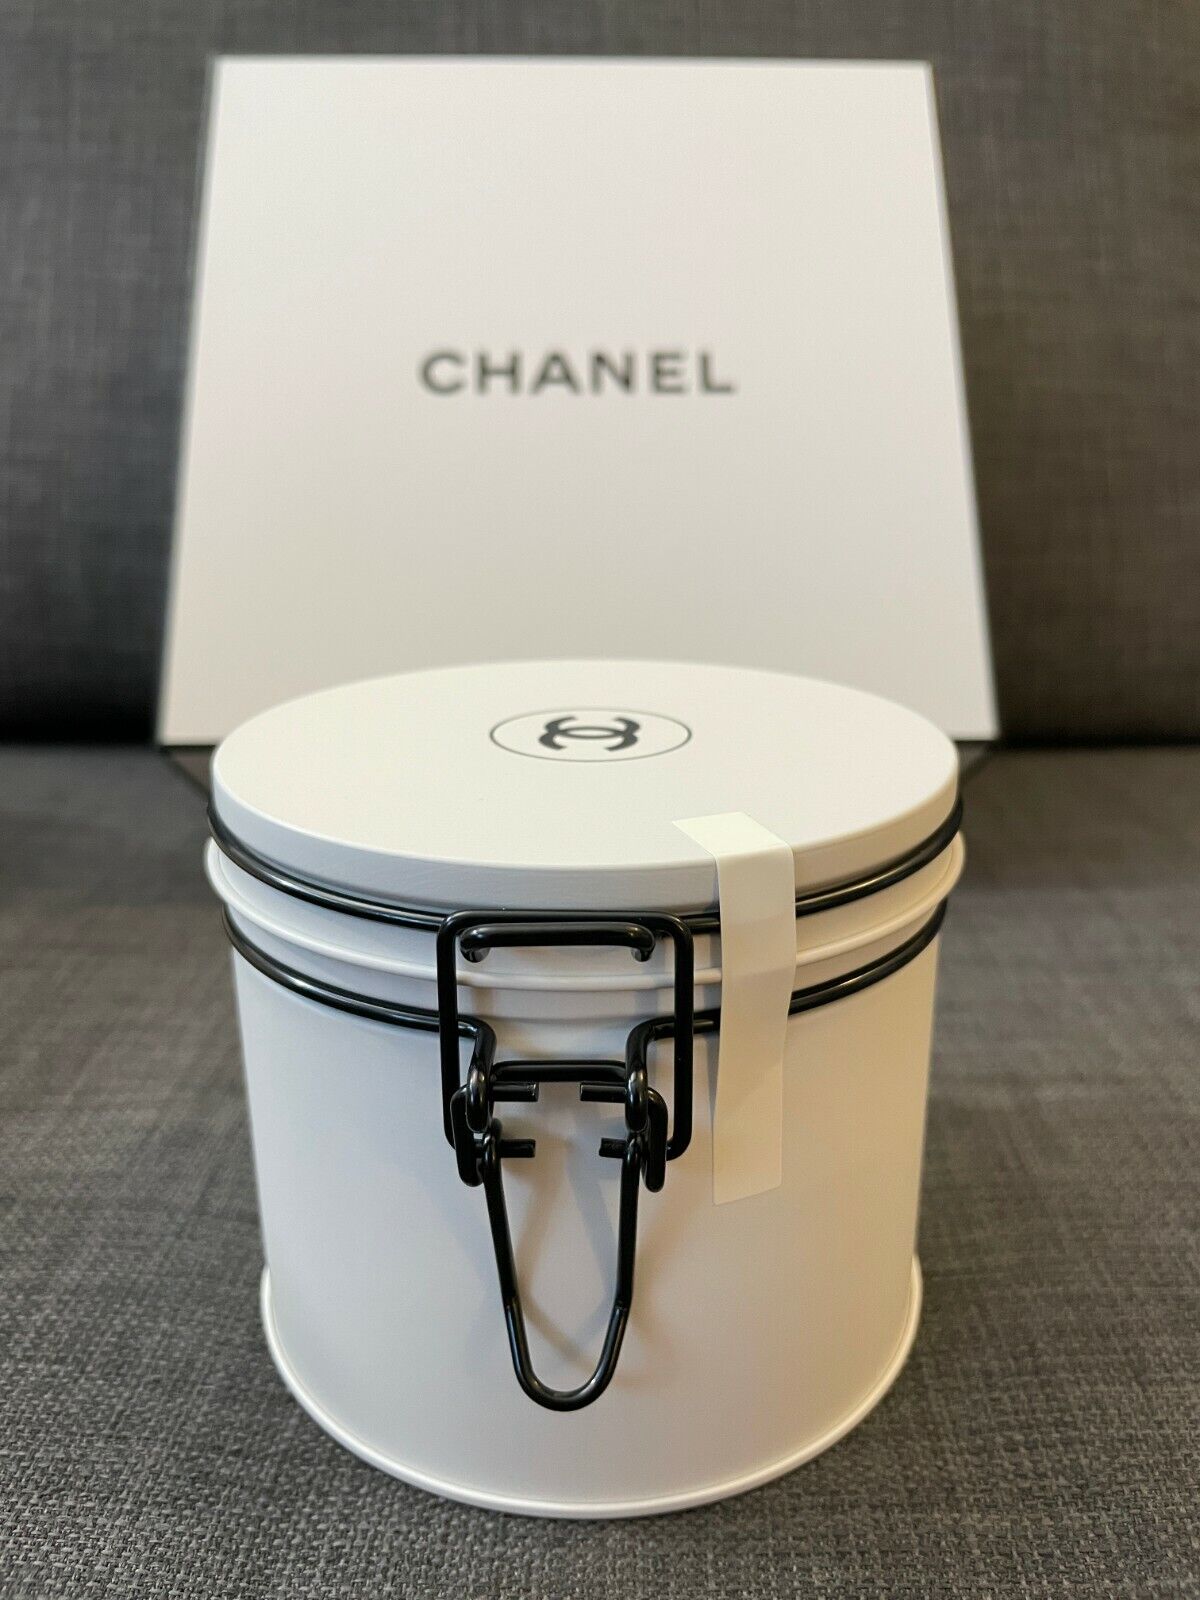 CHANEL+N5+Factory+5+The+Bath+Tablets+Limited+Edition+10x17g for sale online